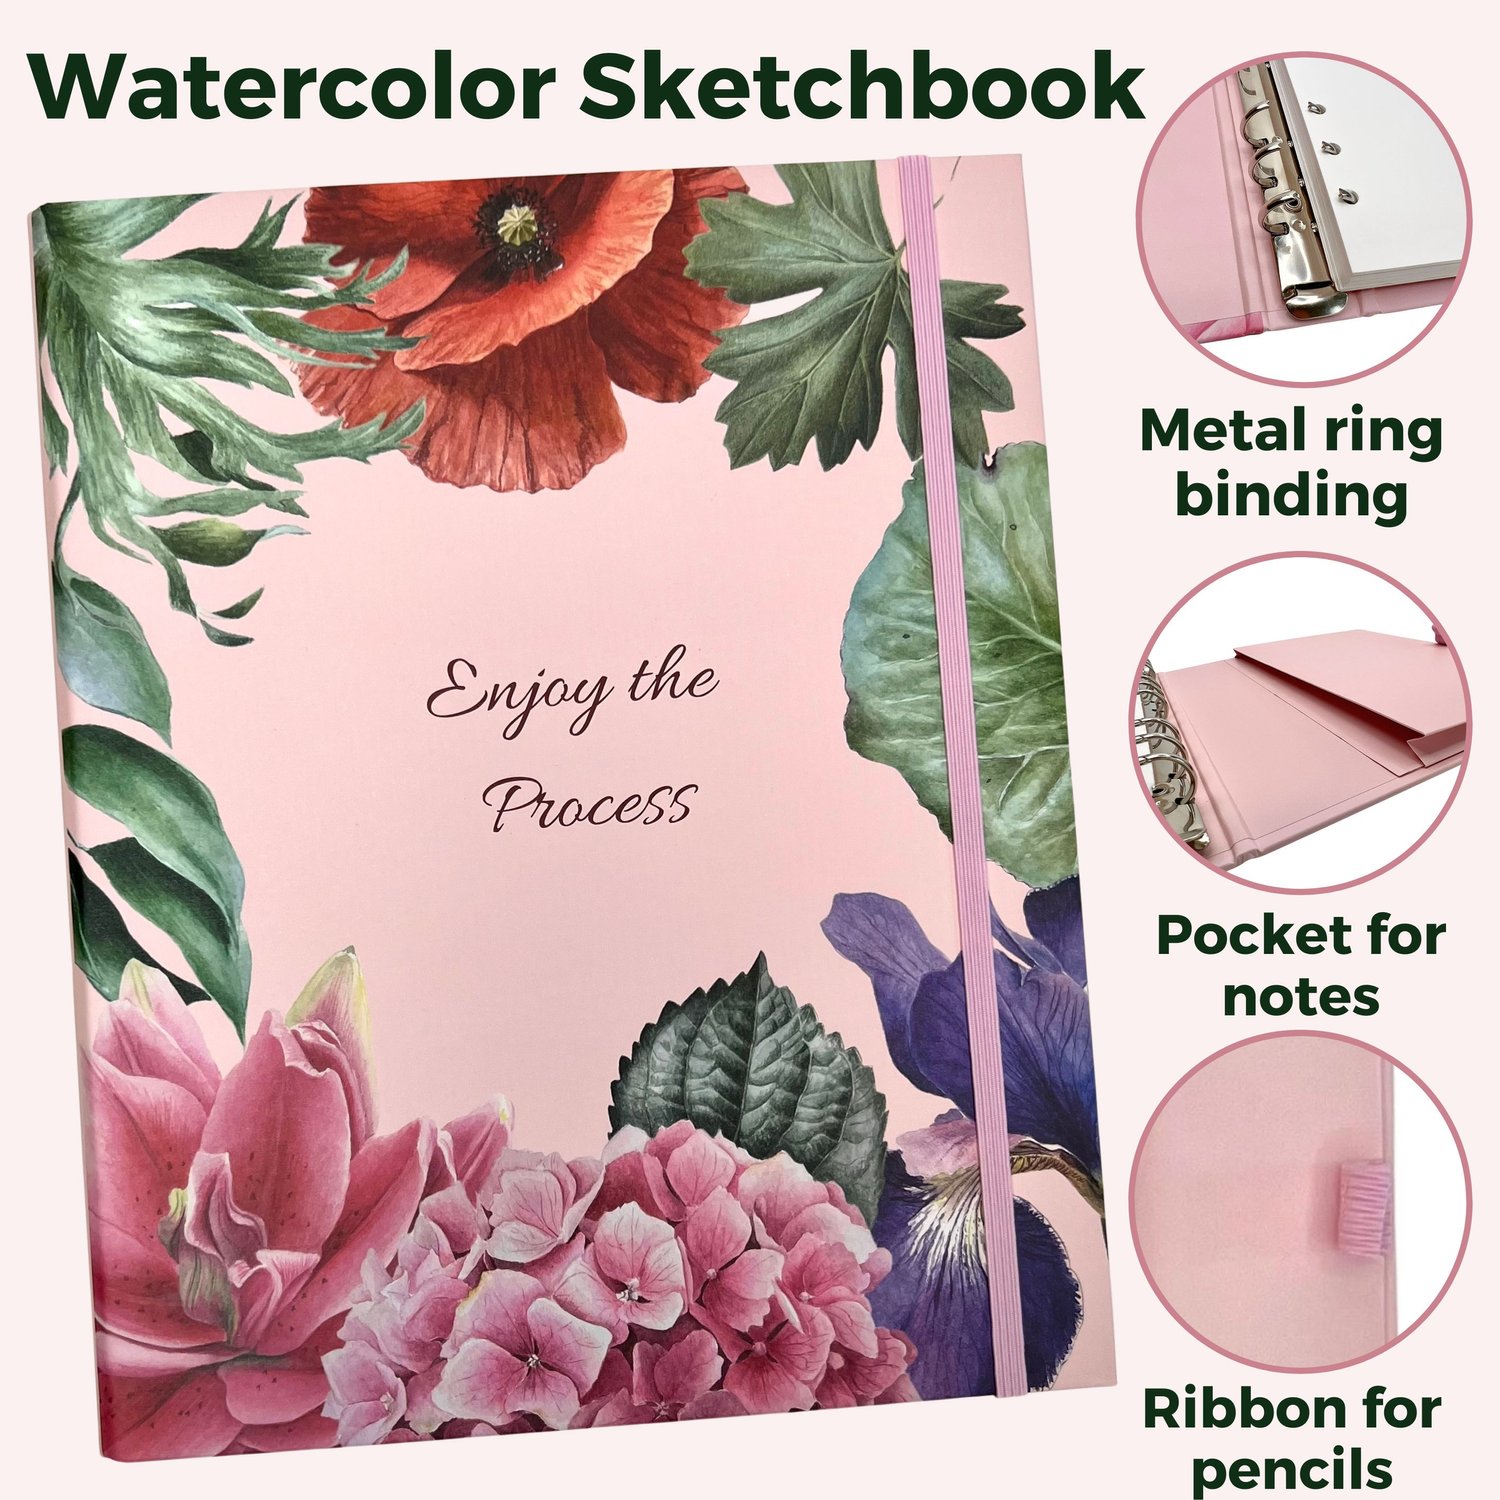 Mini Watercolor sketchbook #swatches #watercolorswatches #watercolor